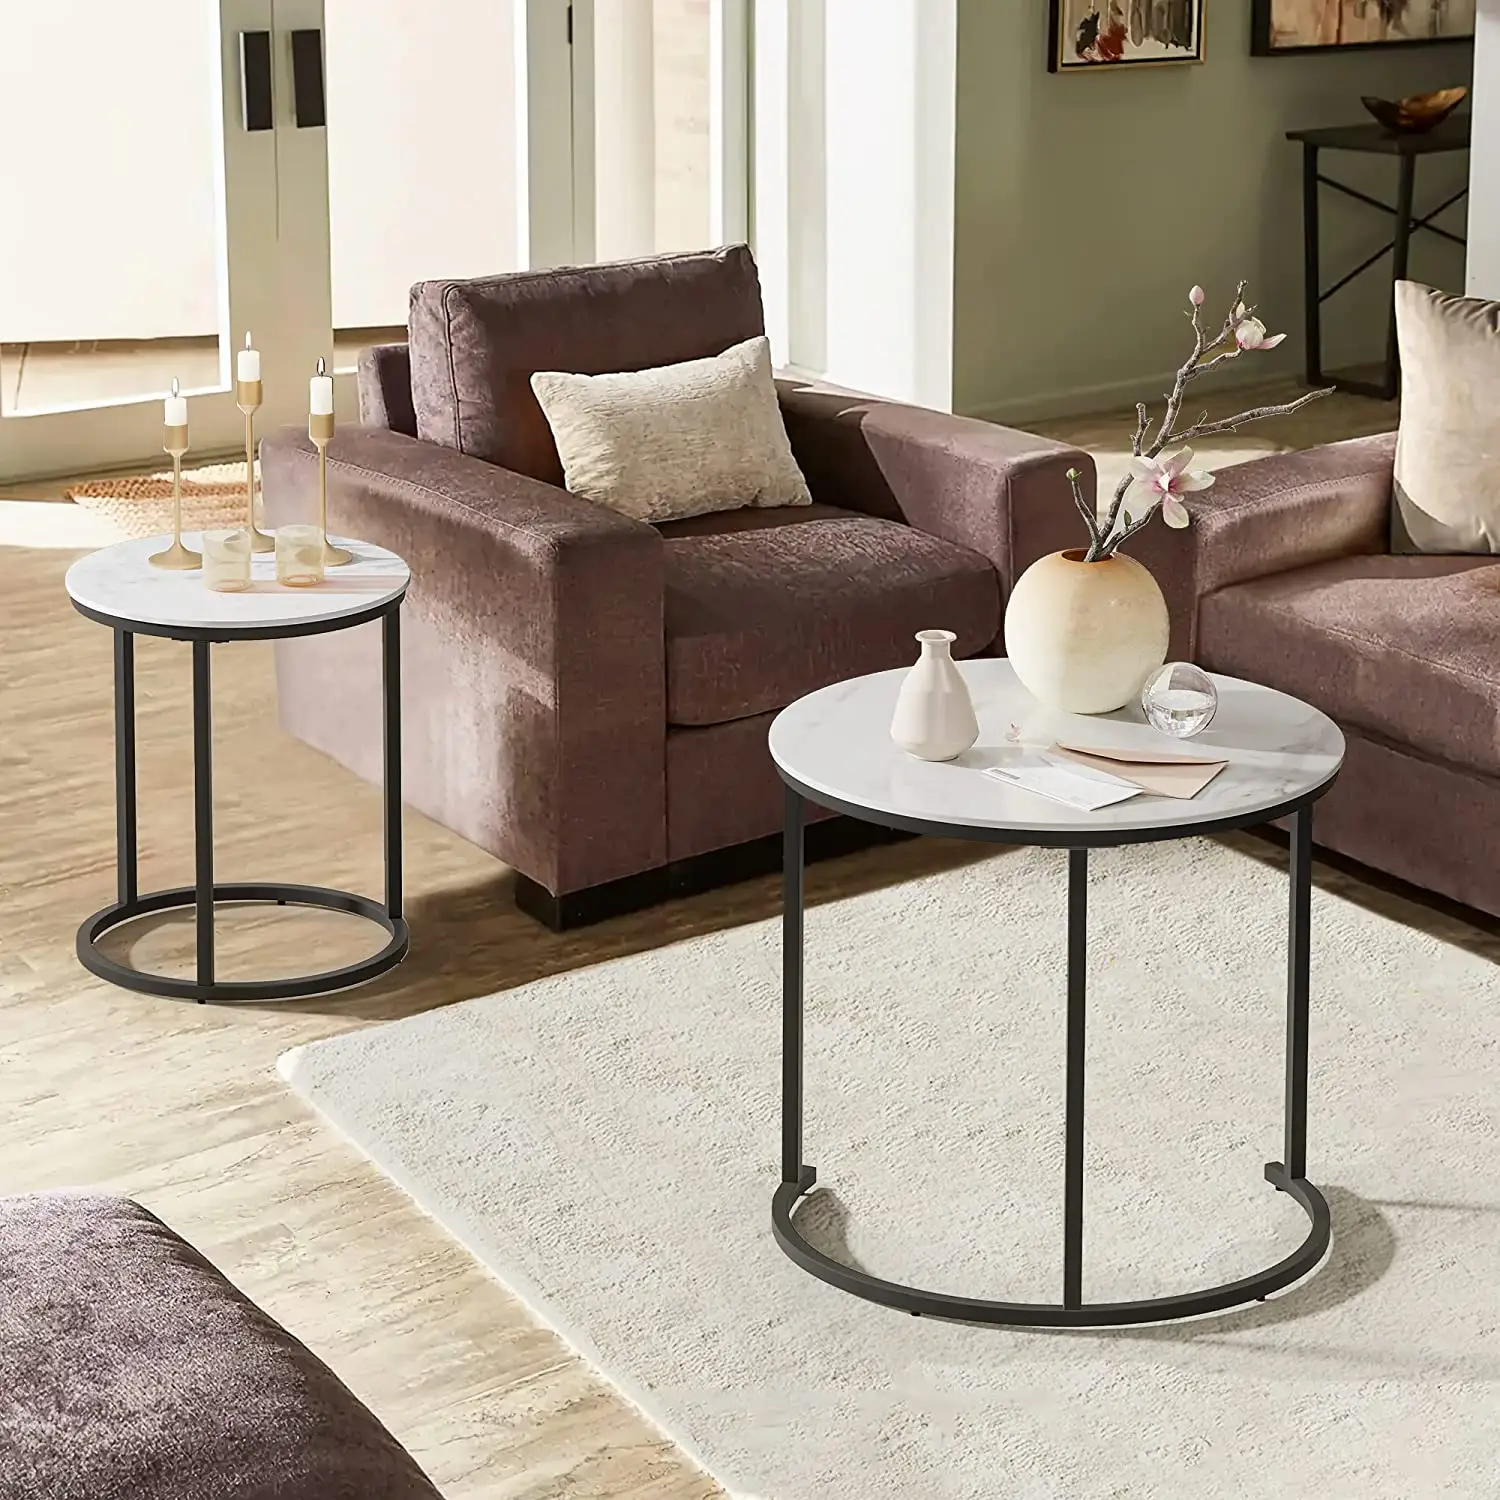 Round Coffee Table Set of 2, Modern Accent Marble Texture Coffee Tables for Living Room Reception Room Office Room